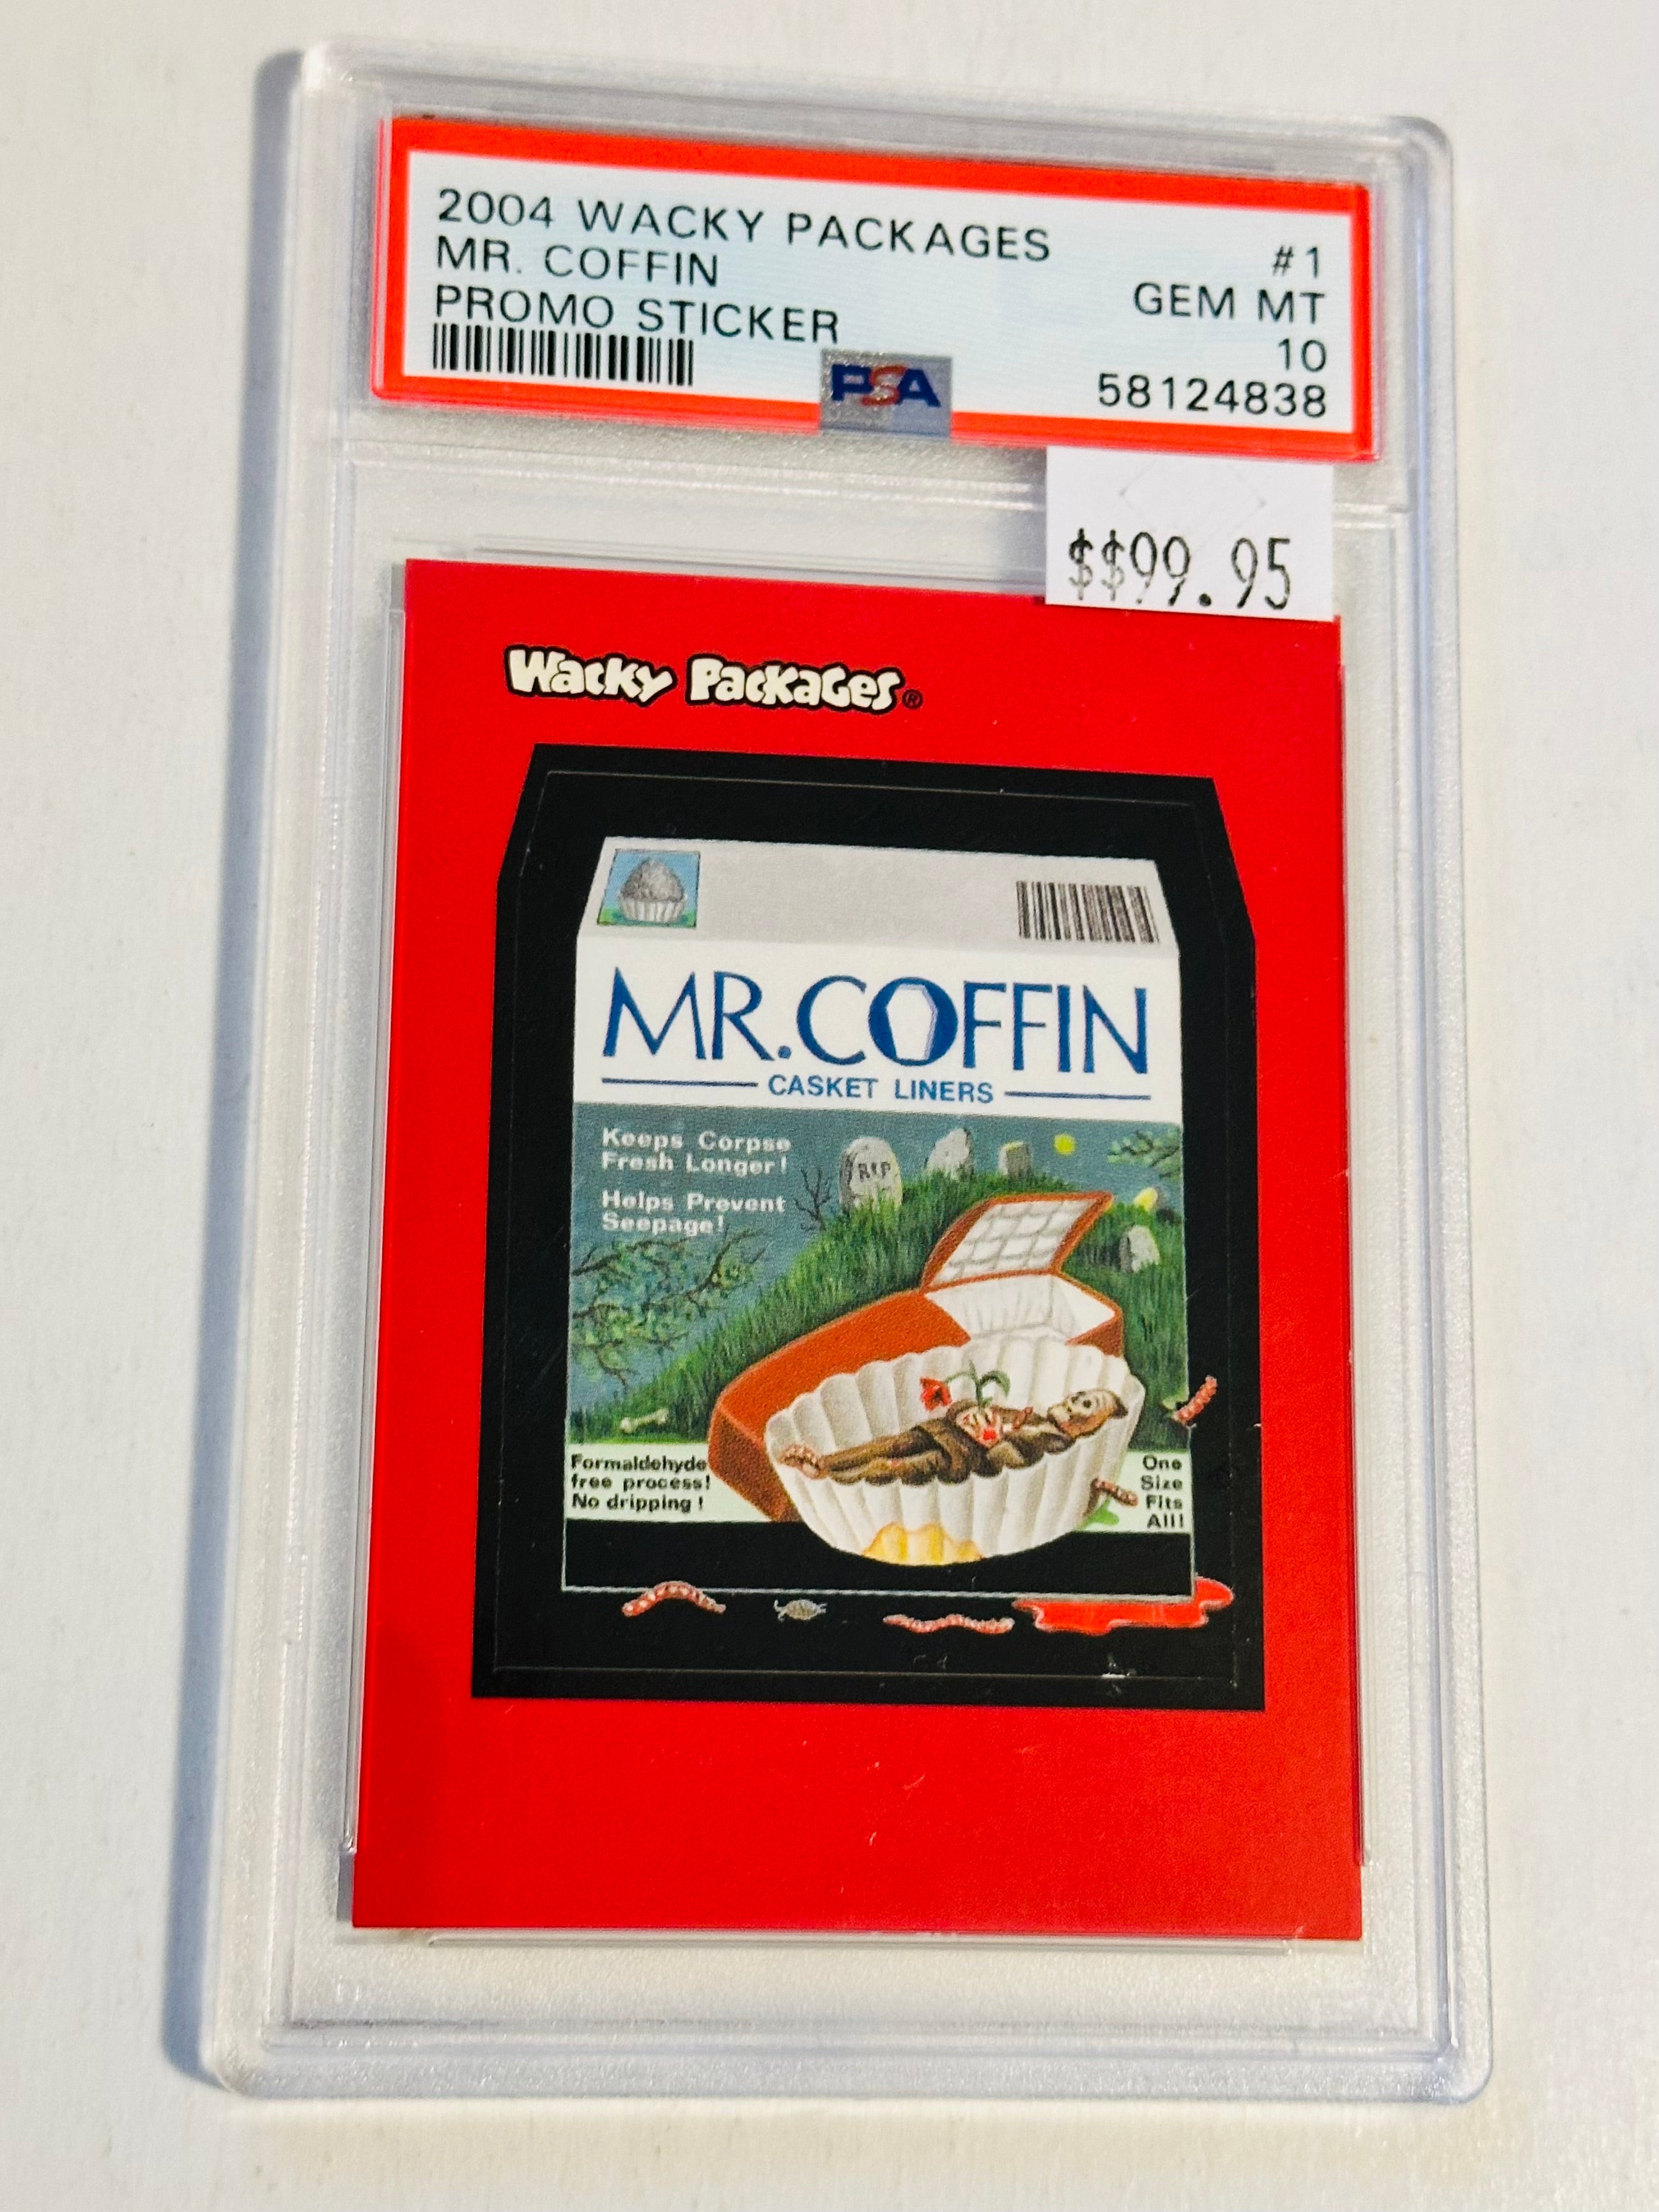 Wacky packages Mr. Coffee rare promo sticker high-grade PSA 10 from 2004